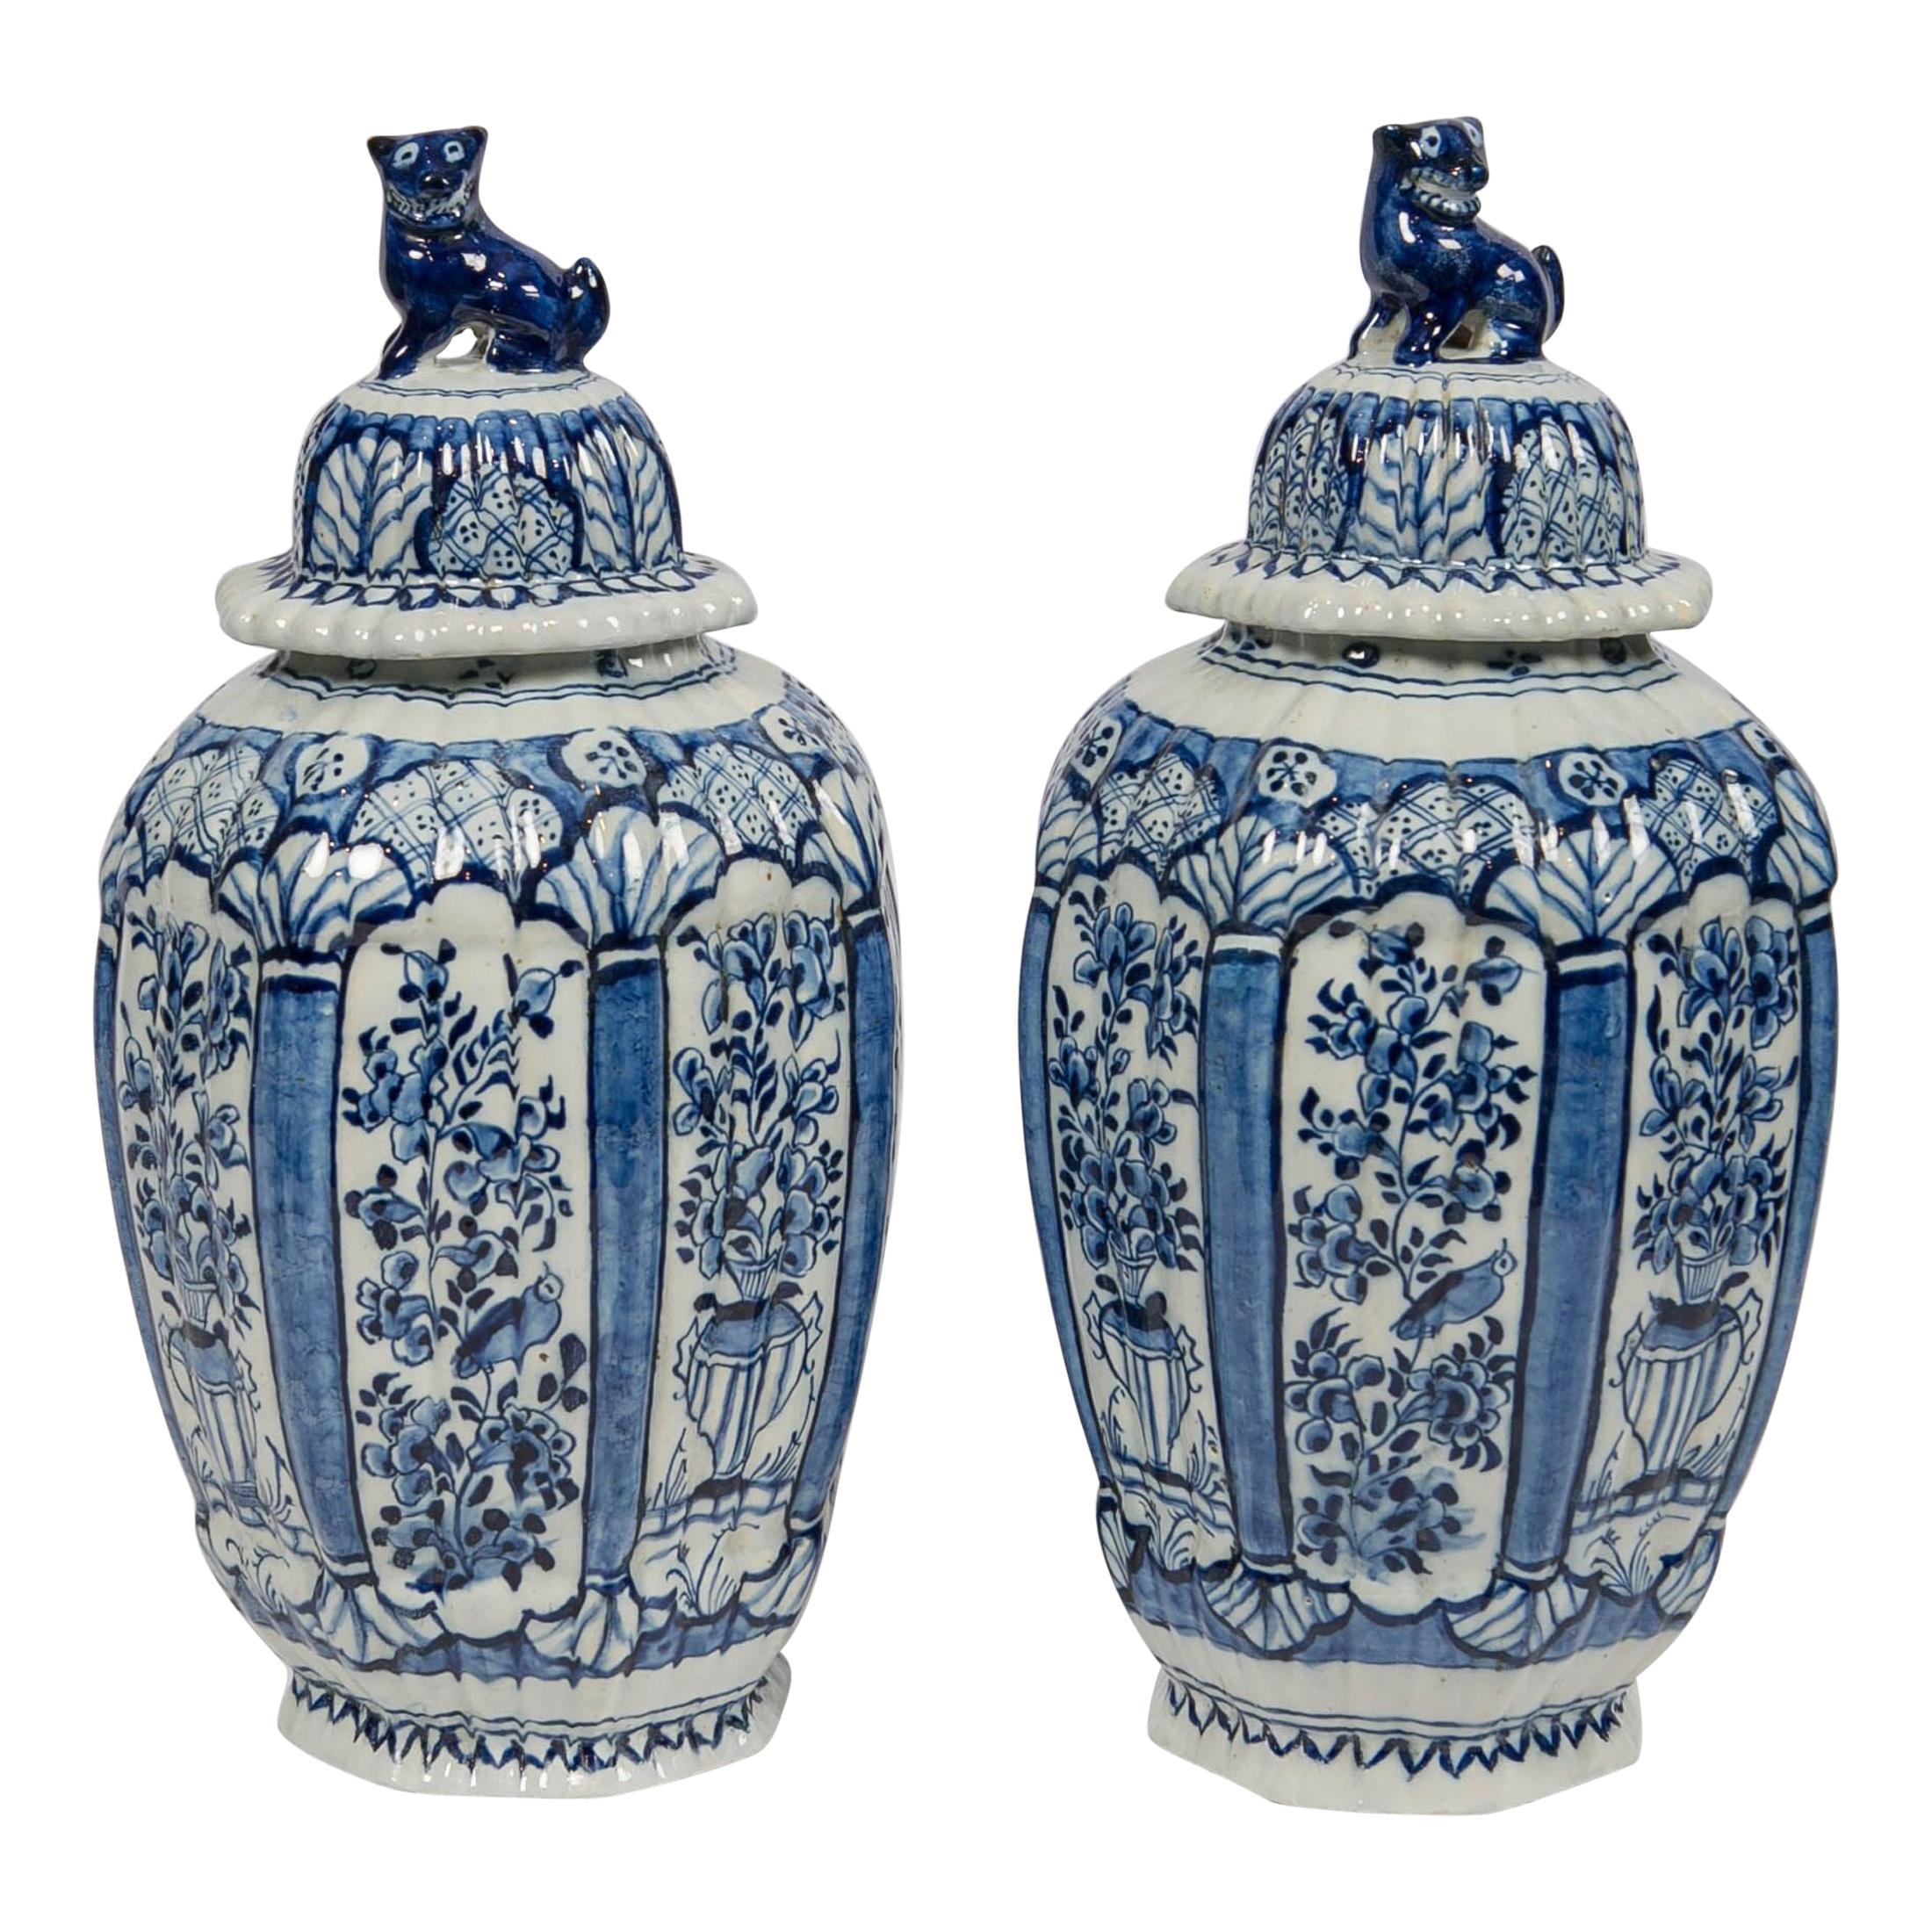 Delft Blue and White Jars with Lion Finials Made circa 1780